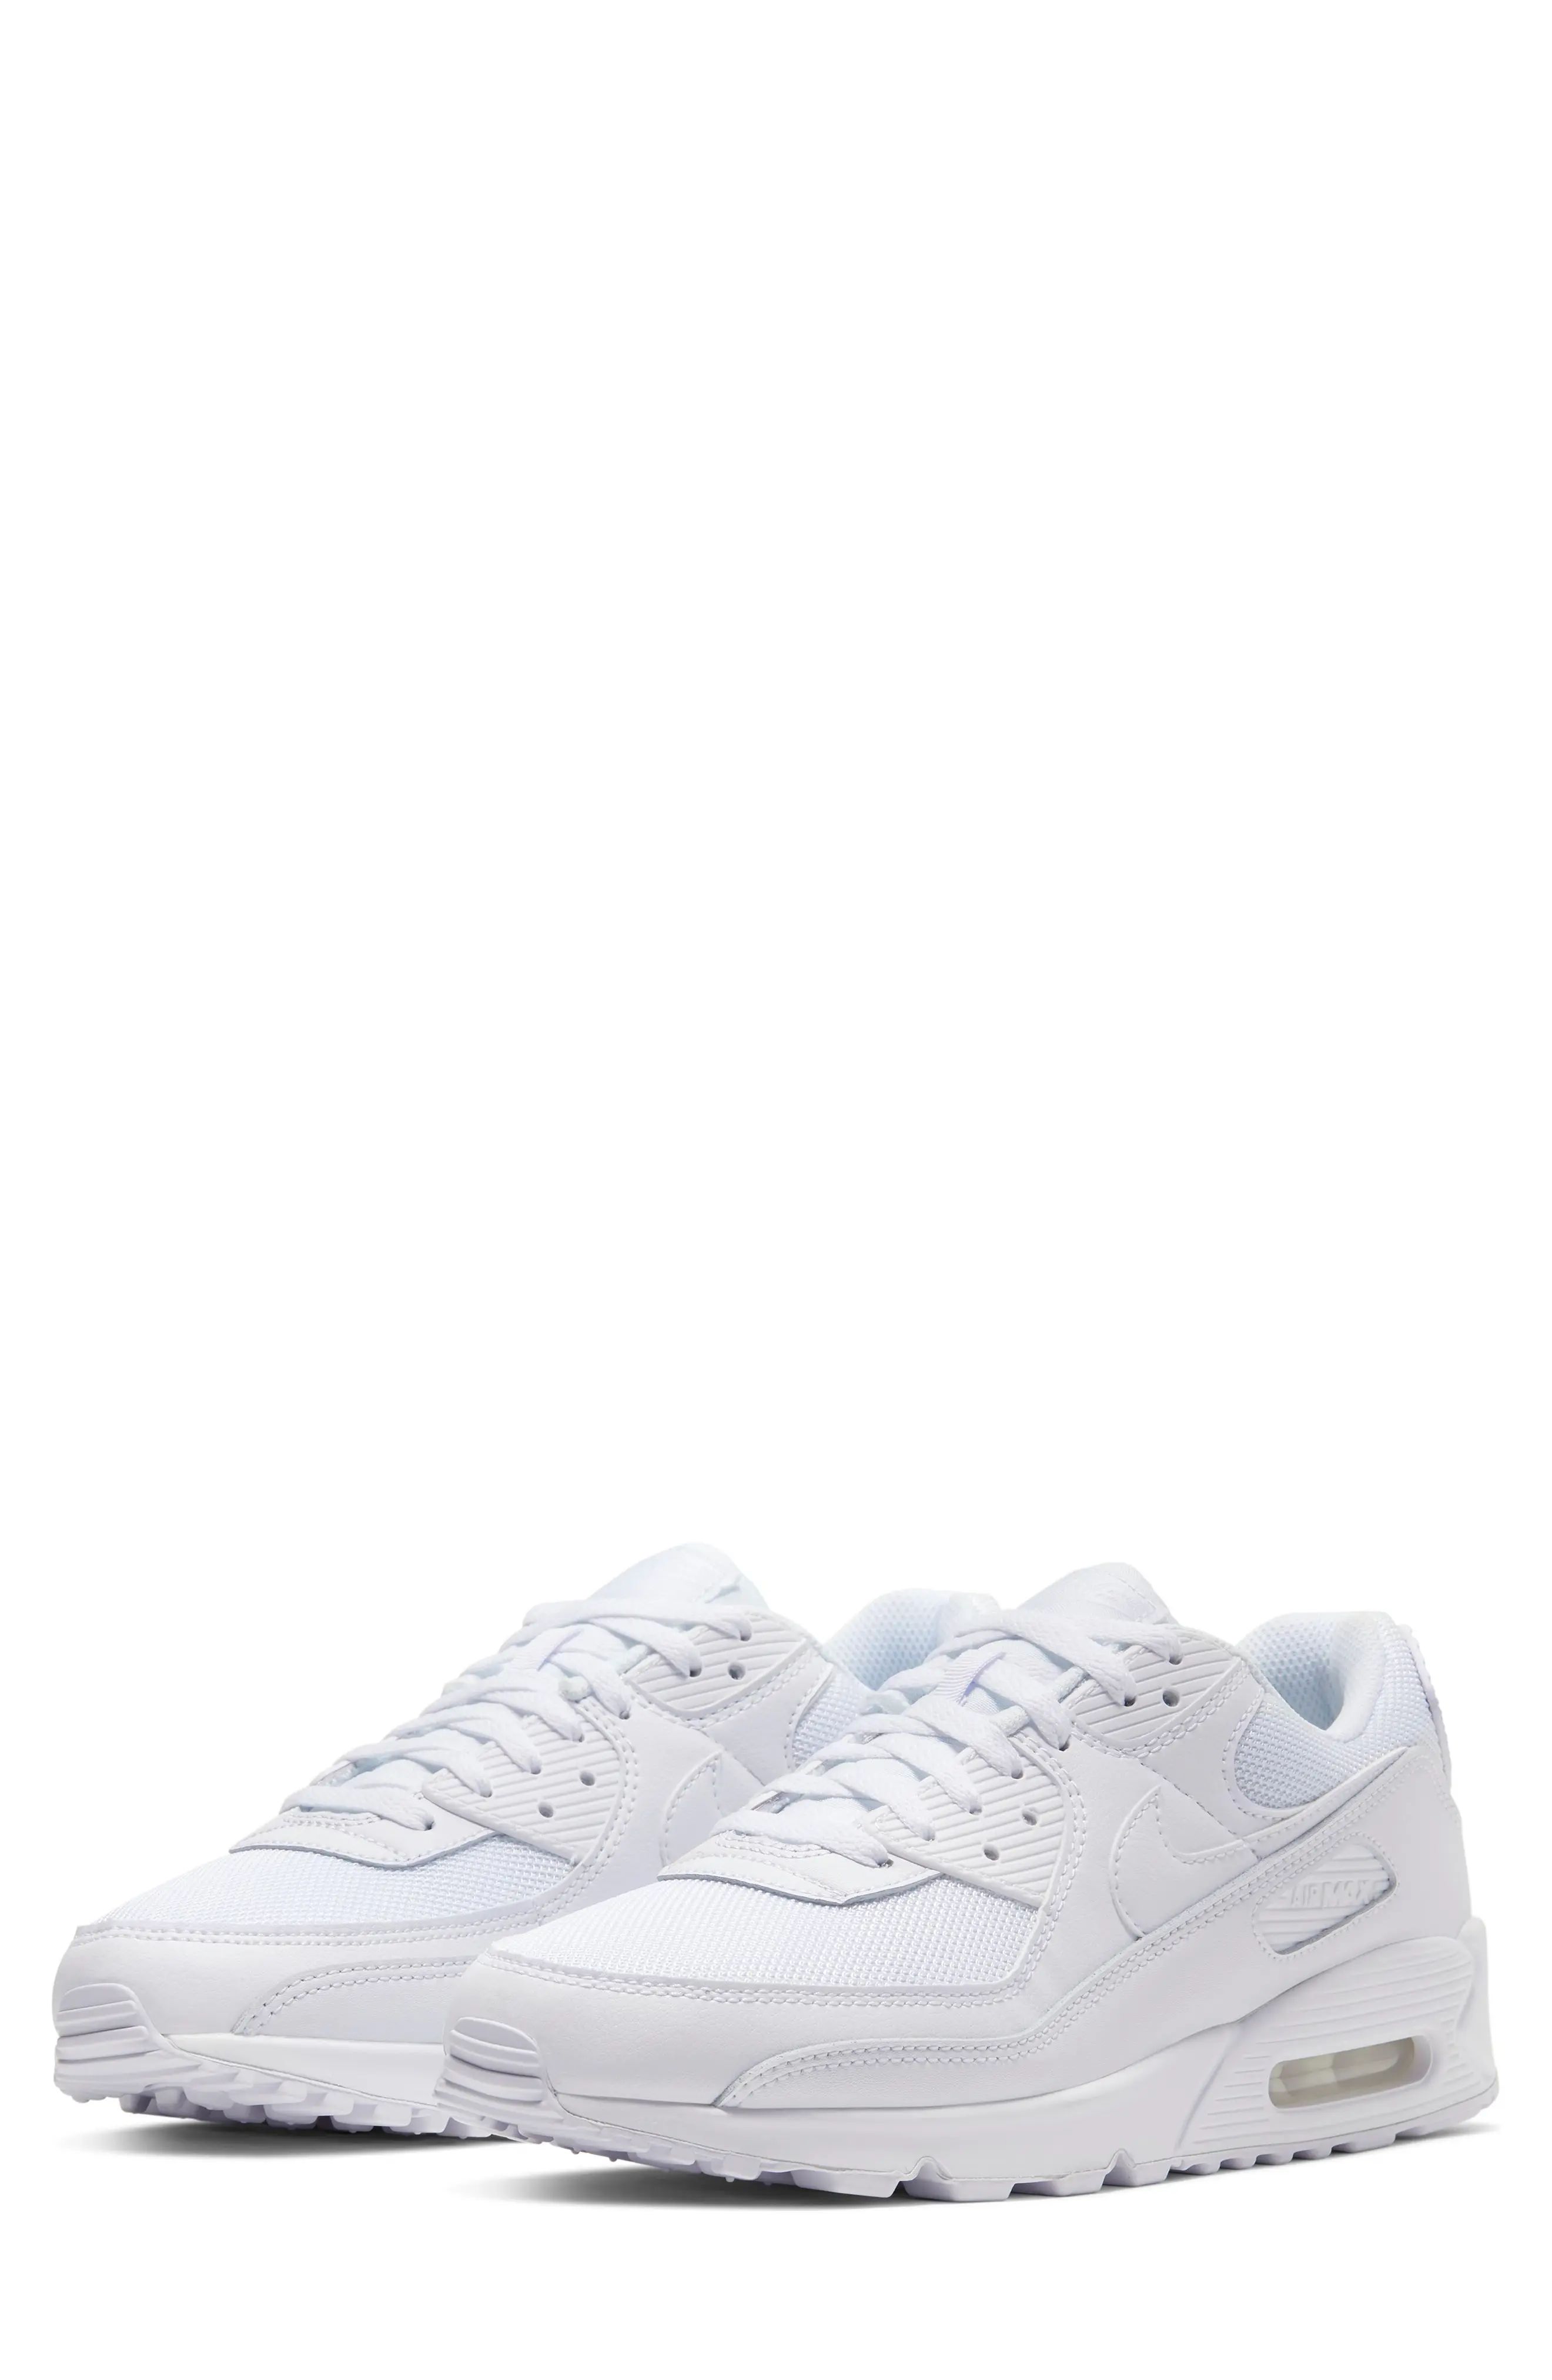 Nike Air Max 90 Sneaker, Size 8 in White/White/White/Wolf Grey at Nordstrom | Nordstrom